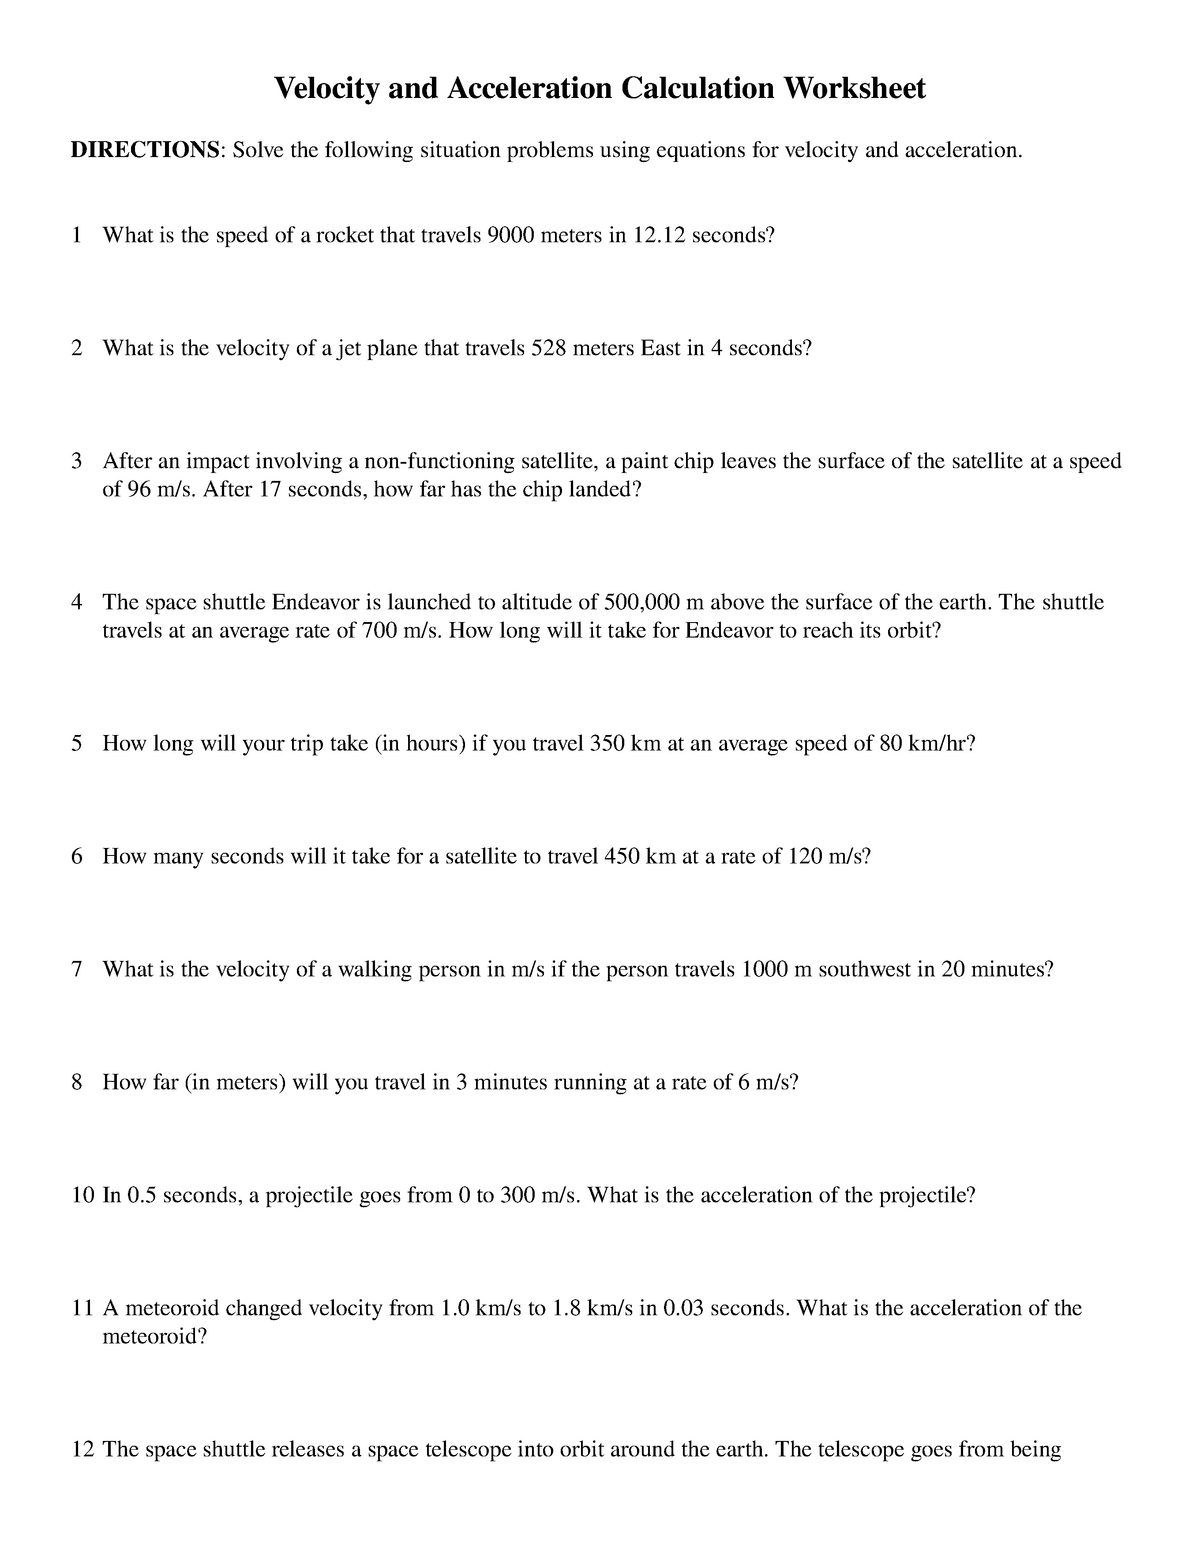 Exam 22 April 22, questions - Velocity and Acceleration Throughout Velocity And Acceleration Calculation Worksheet